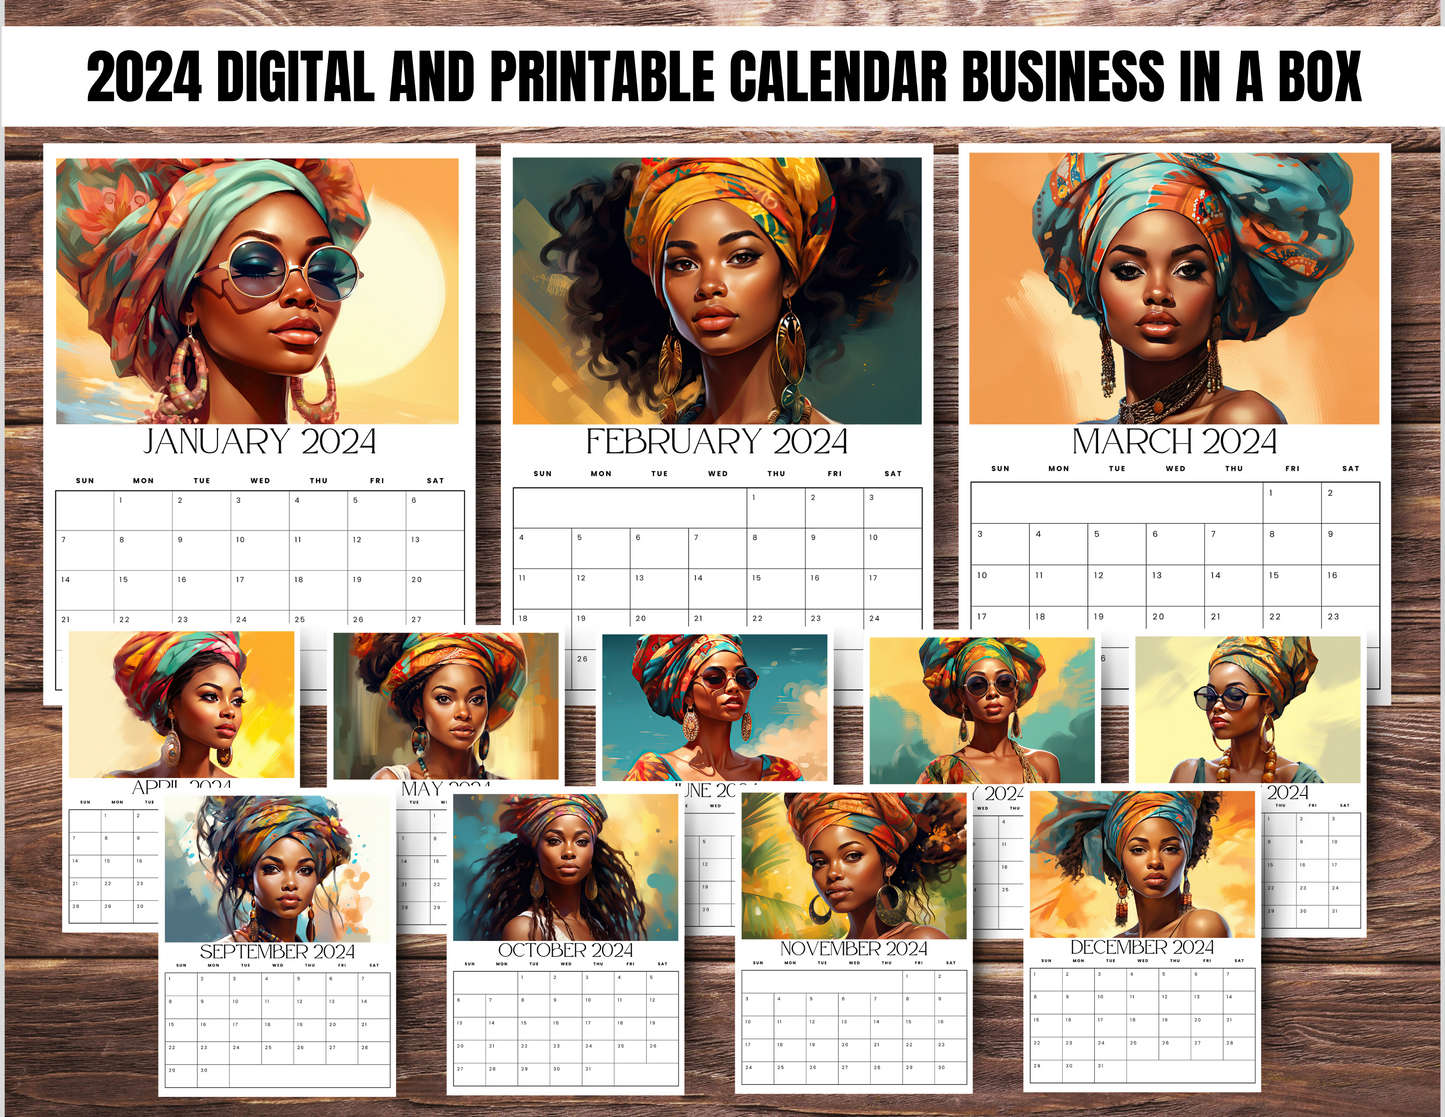 015-BKB | Create & Sell Your Own 2024 Calendars | DFY Designs & Templates